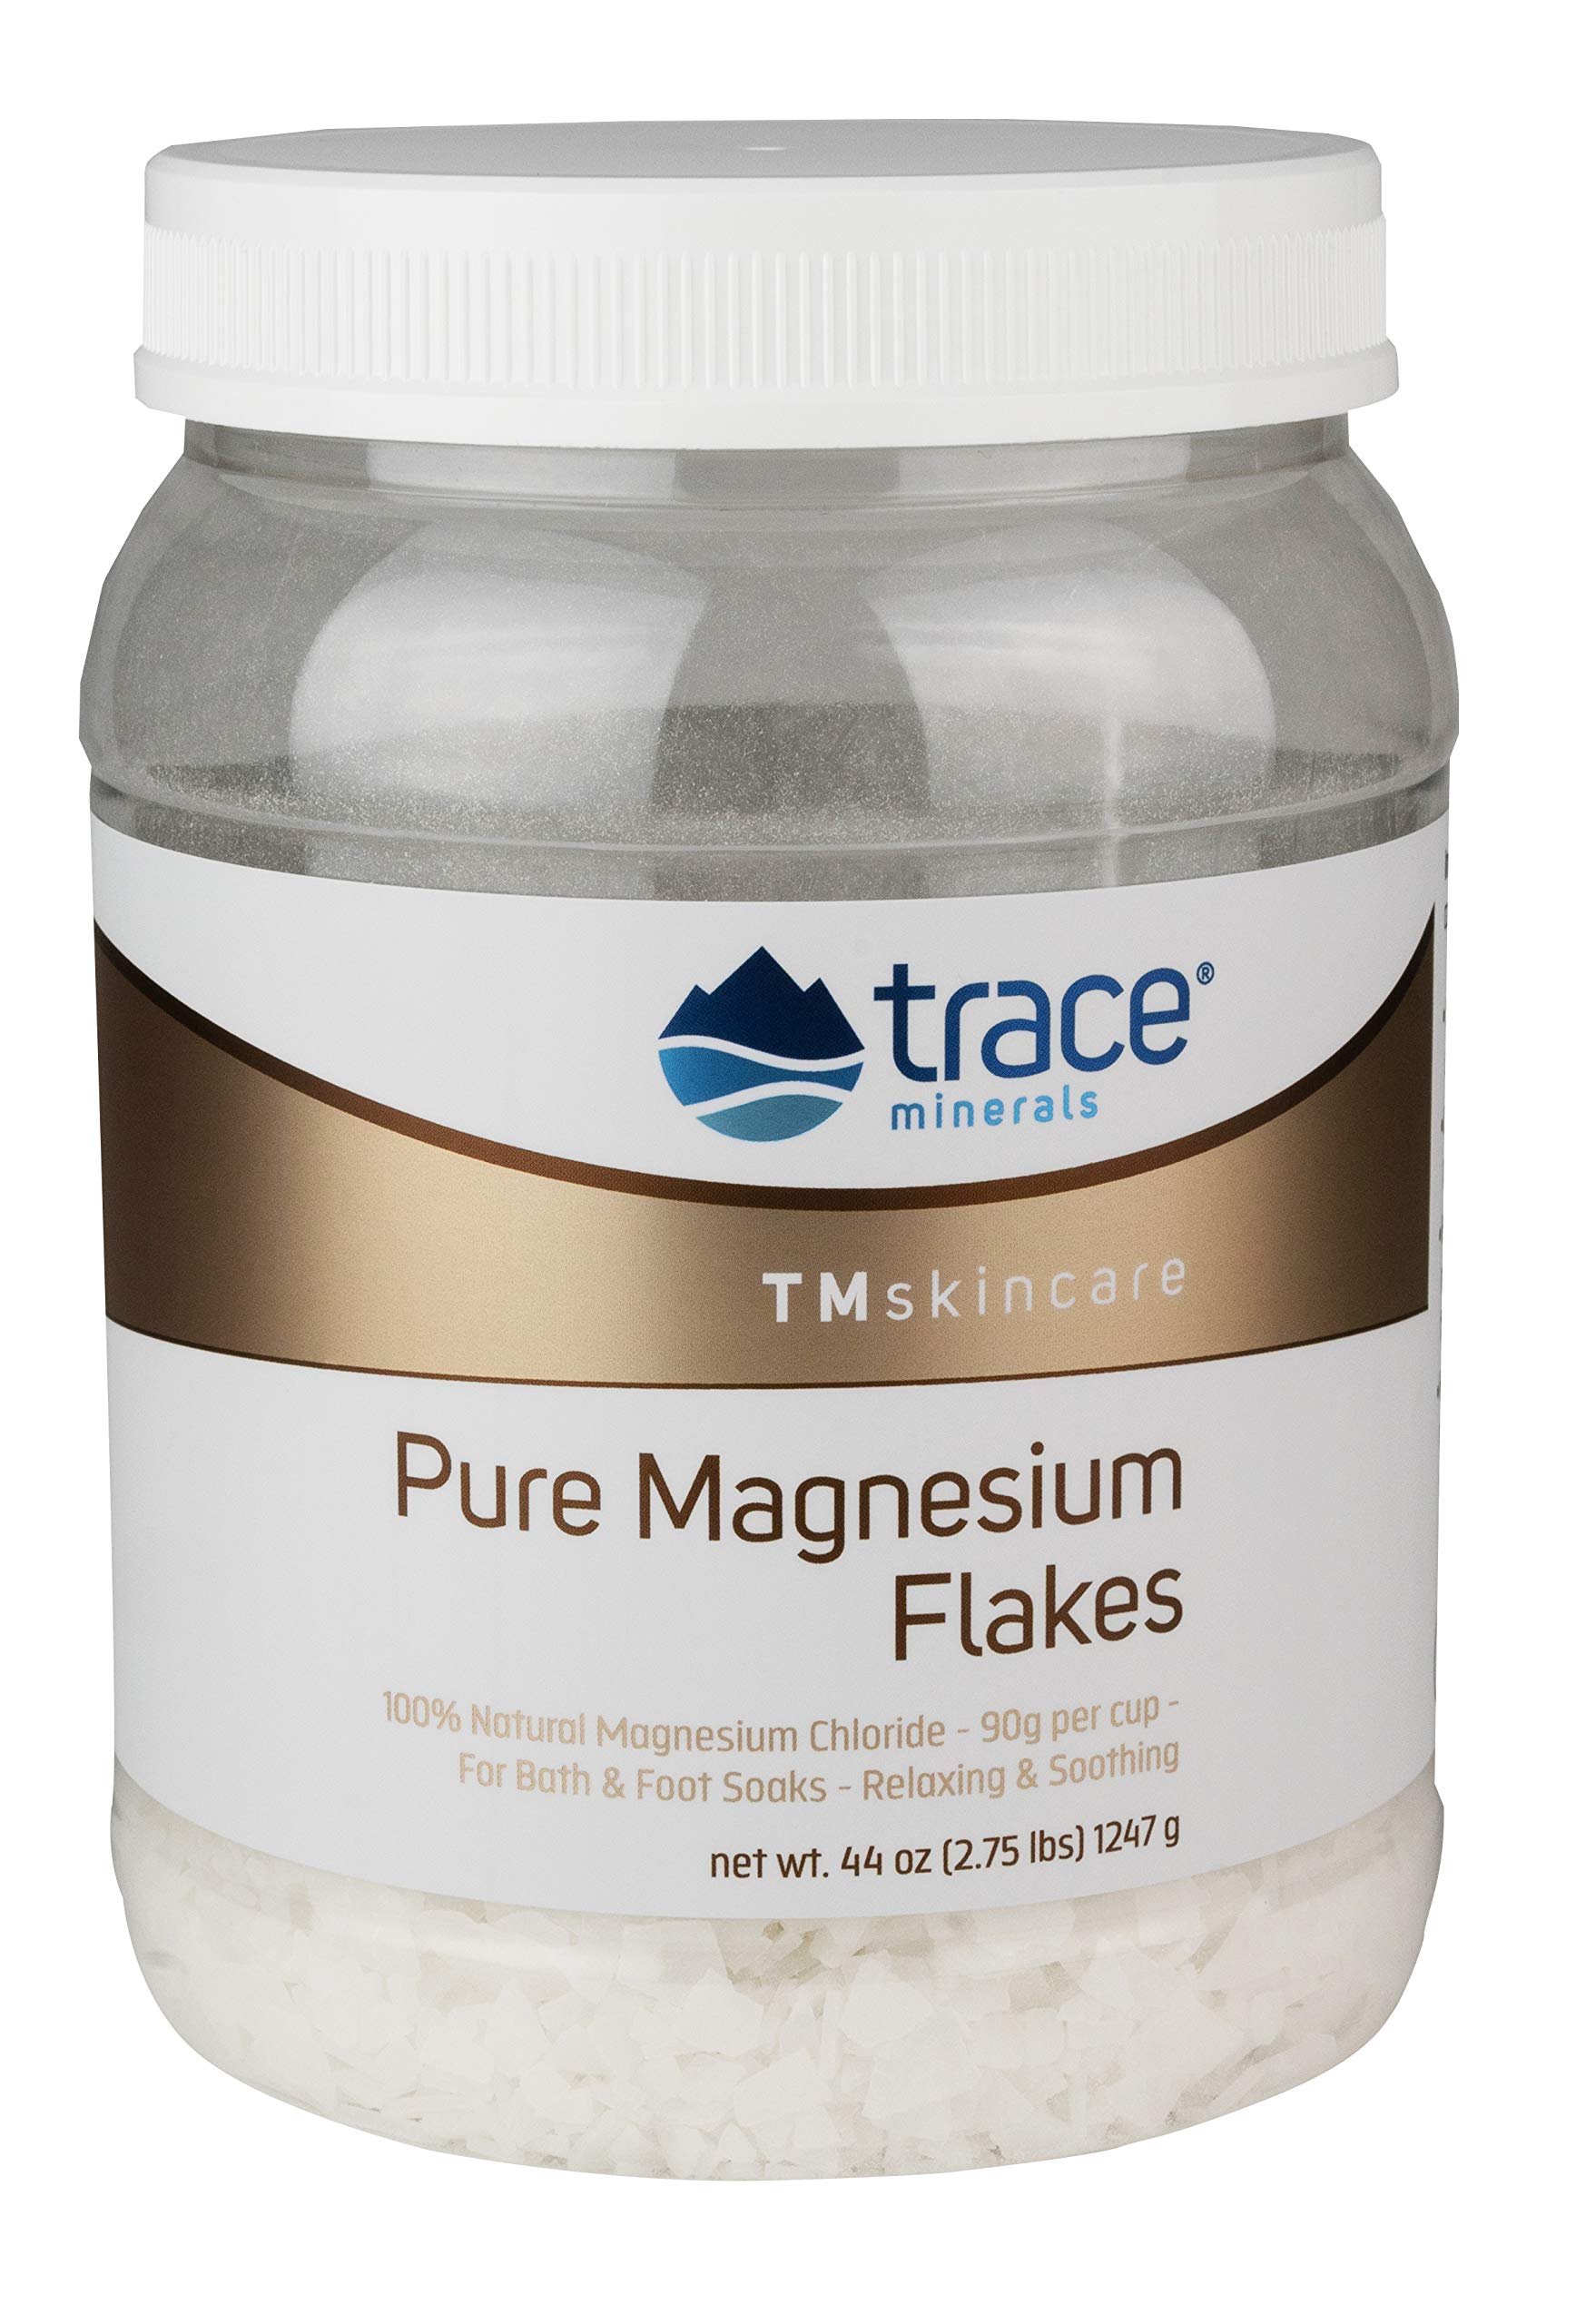 Trace Minerals | TMskincare Pure Magnesium Flakes for Bath and Foot Soaks | Promotes Feet Wellness, Soothing, and Muscle Relaxation | 44 Oz (2.75 lbs) 1247 g